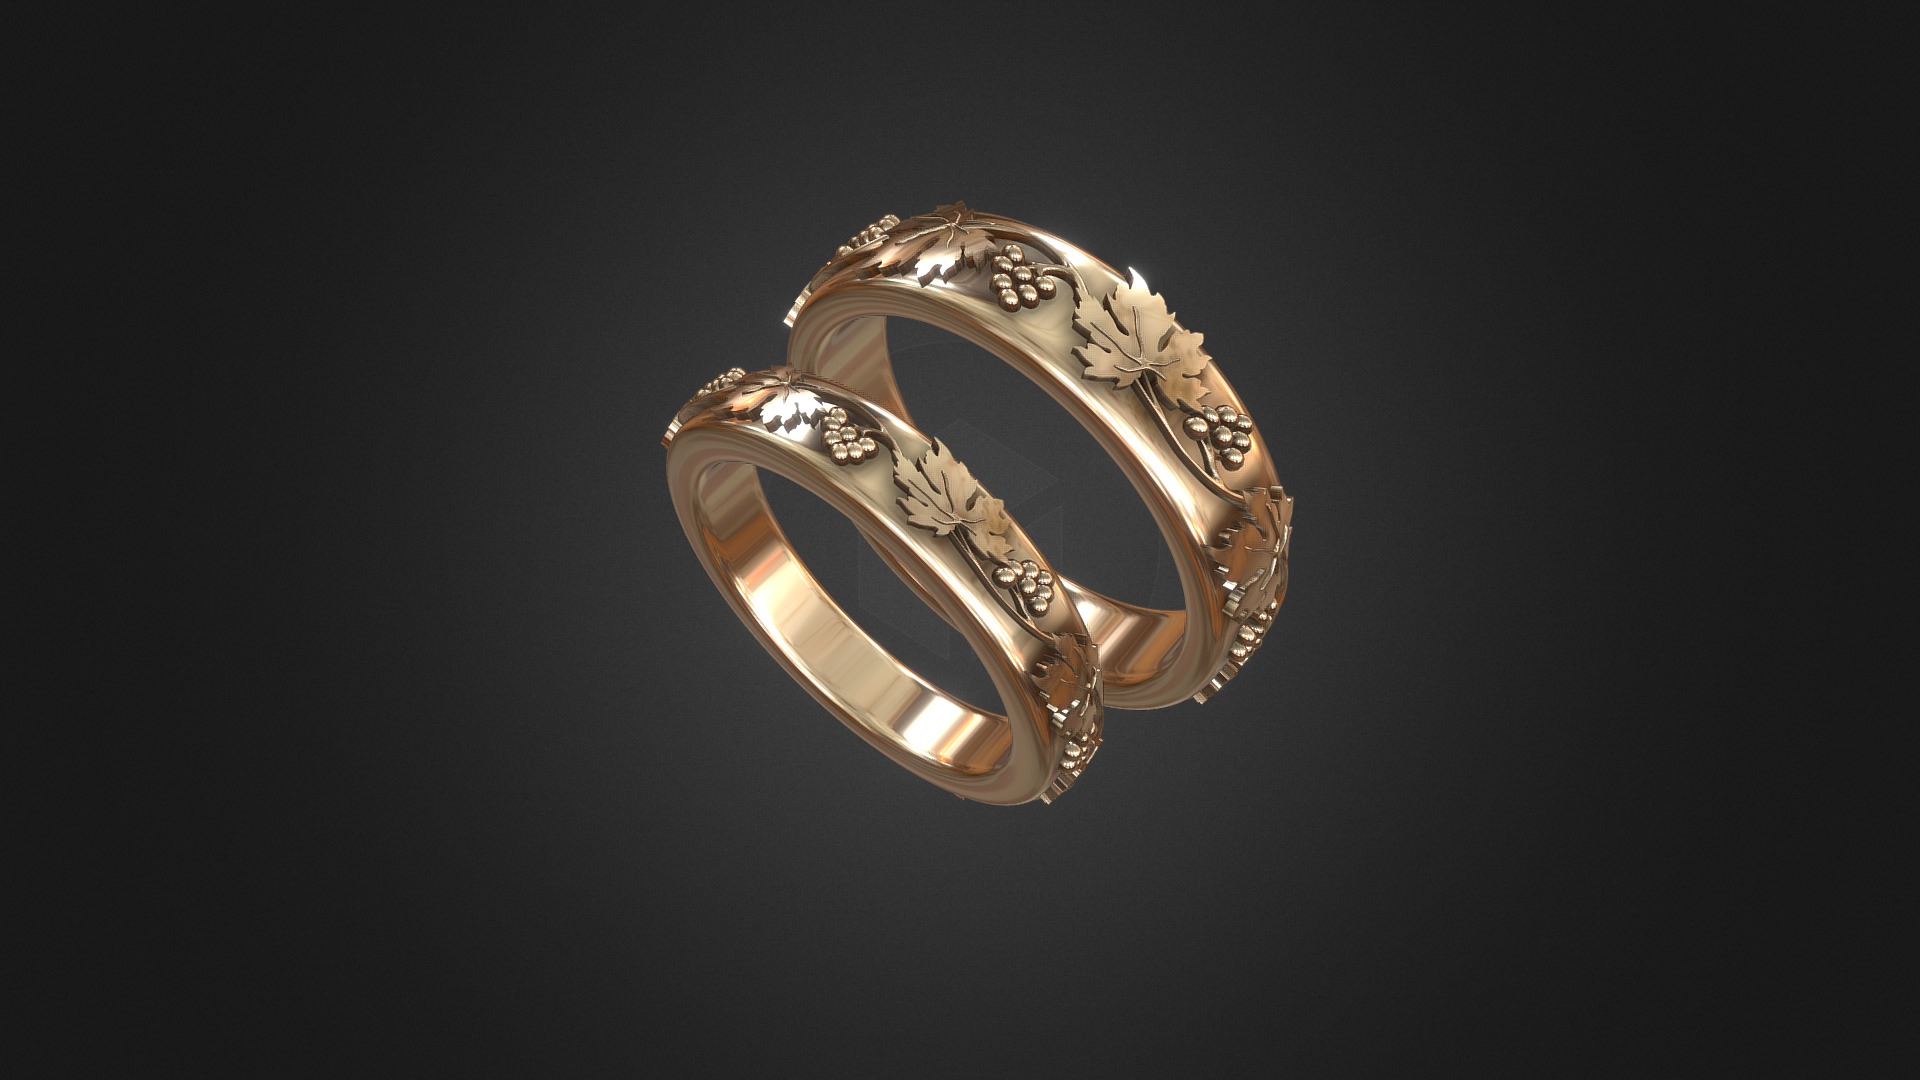 3D model 884 – Rings - This is a 3D model of the 884 - Rings. The 3D model is about a ring with a diamond in it.